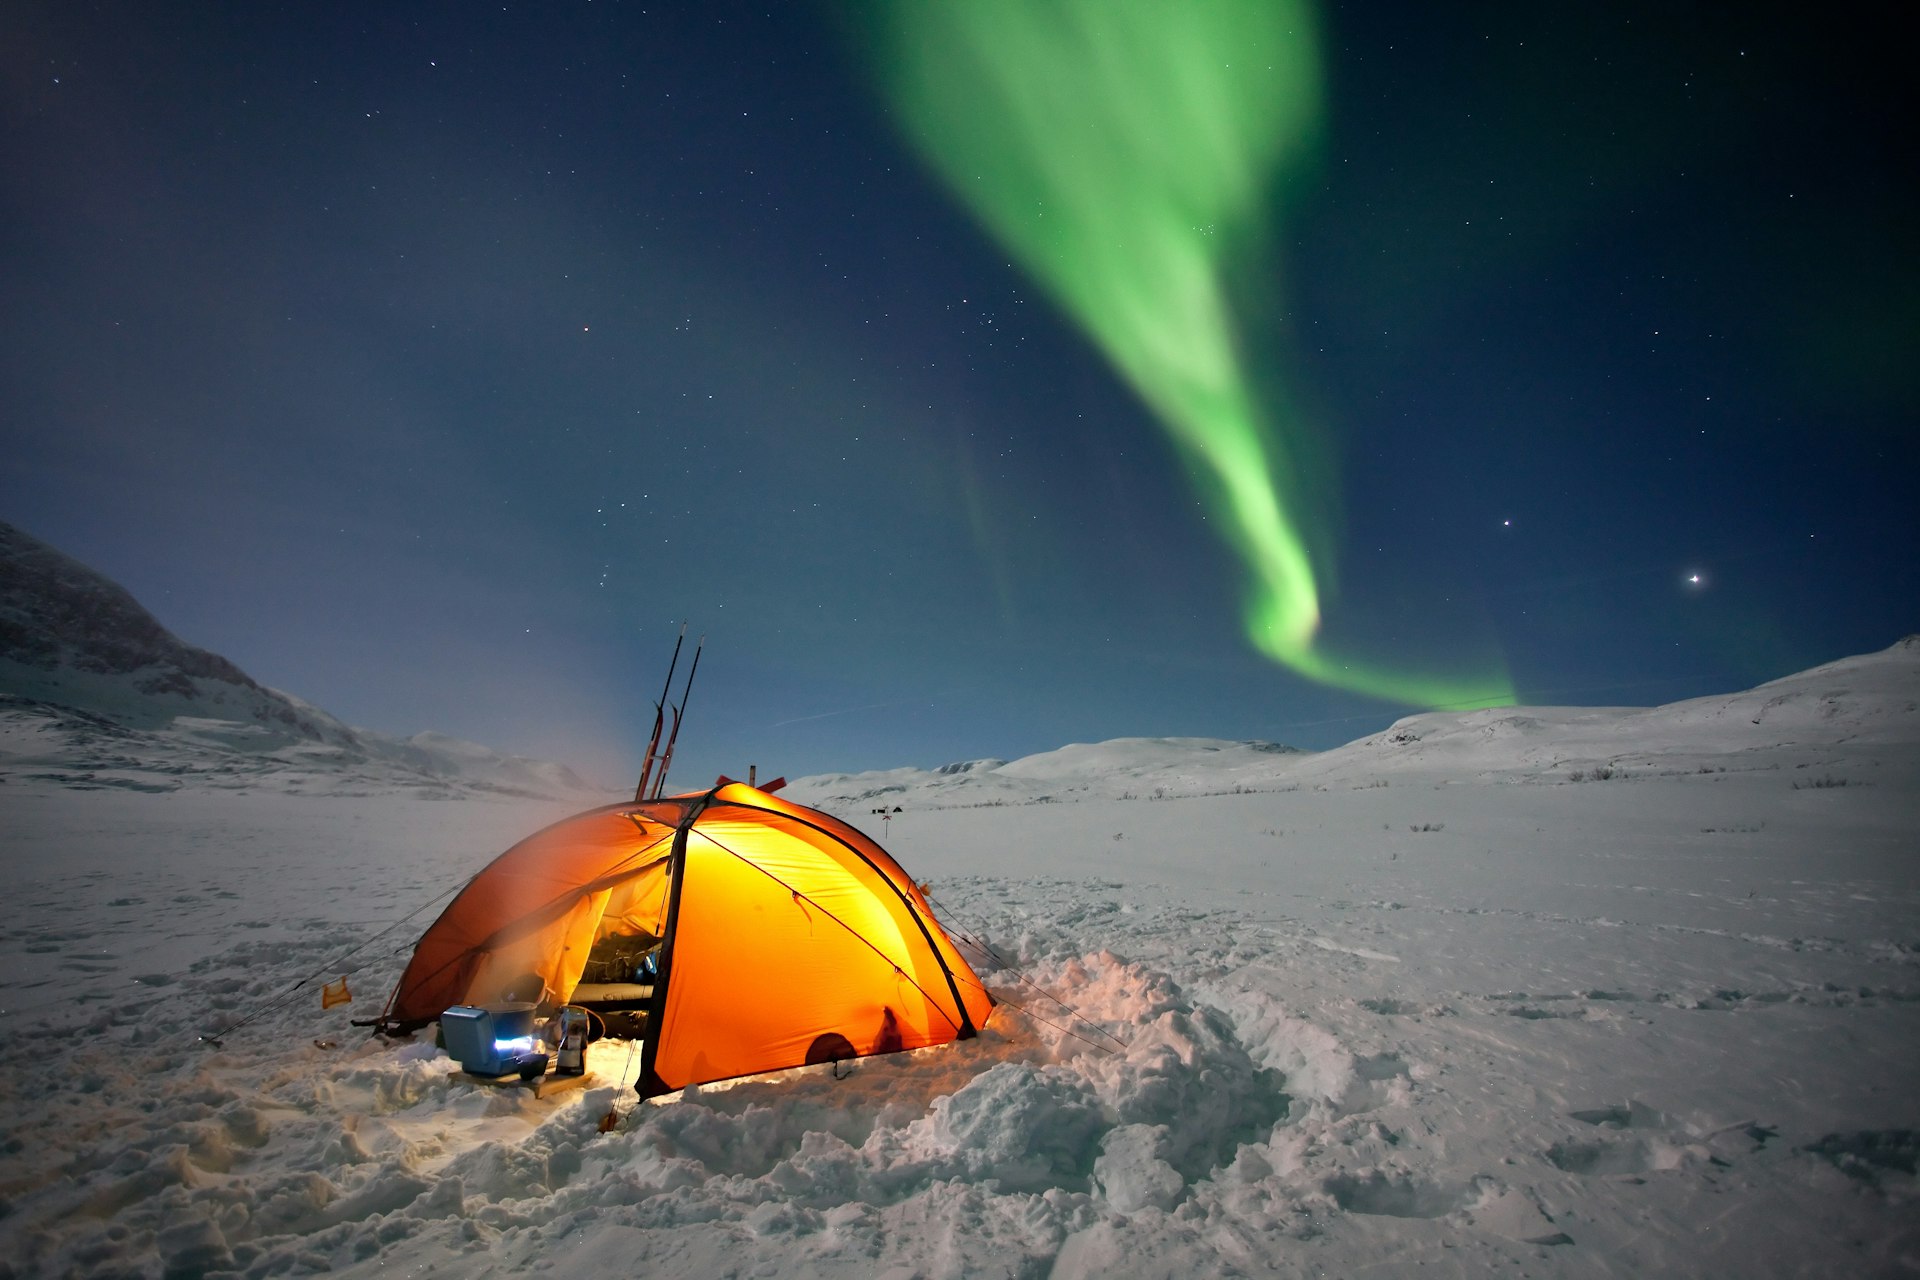 A tent in a snowy field under the Northern Lights in Sweden